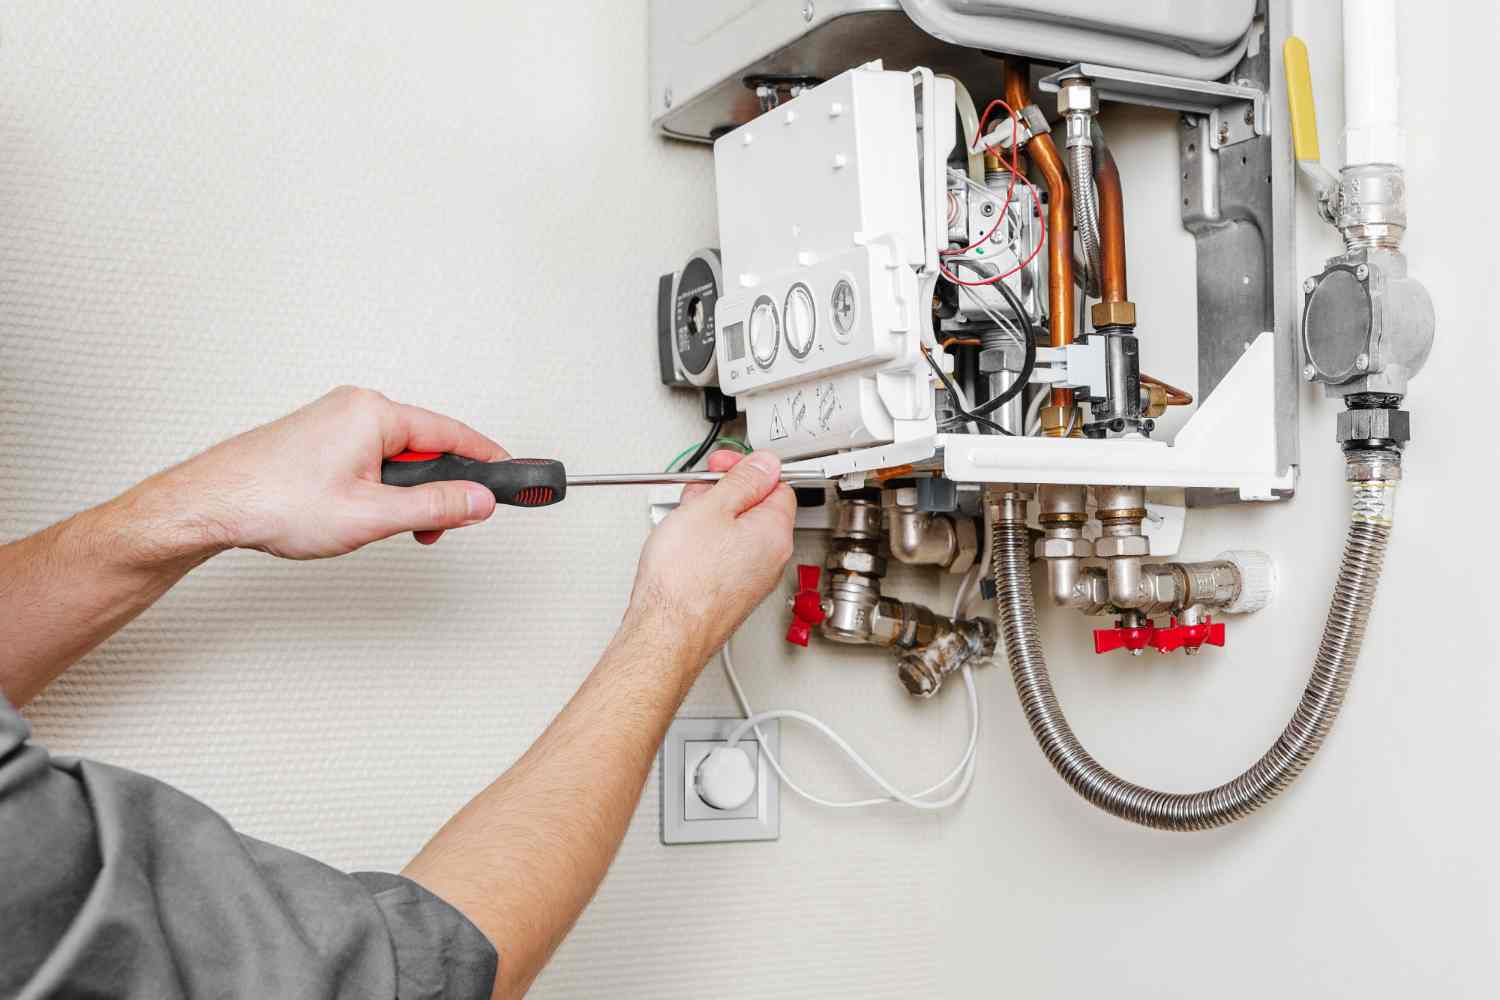 Replacing Gas or Oil Boiler for an Electrical Boiler